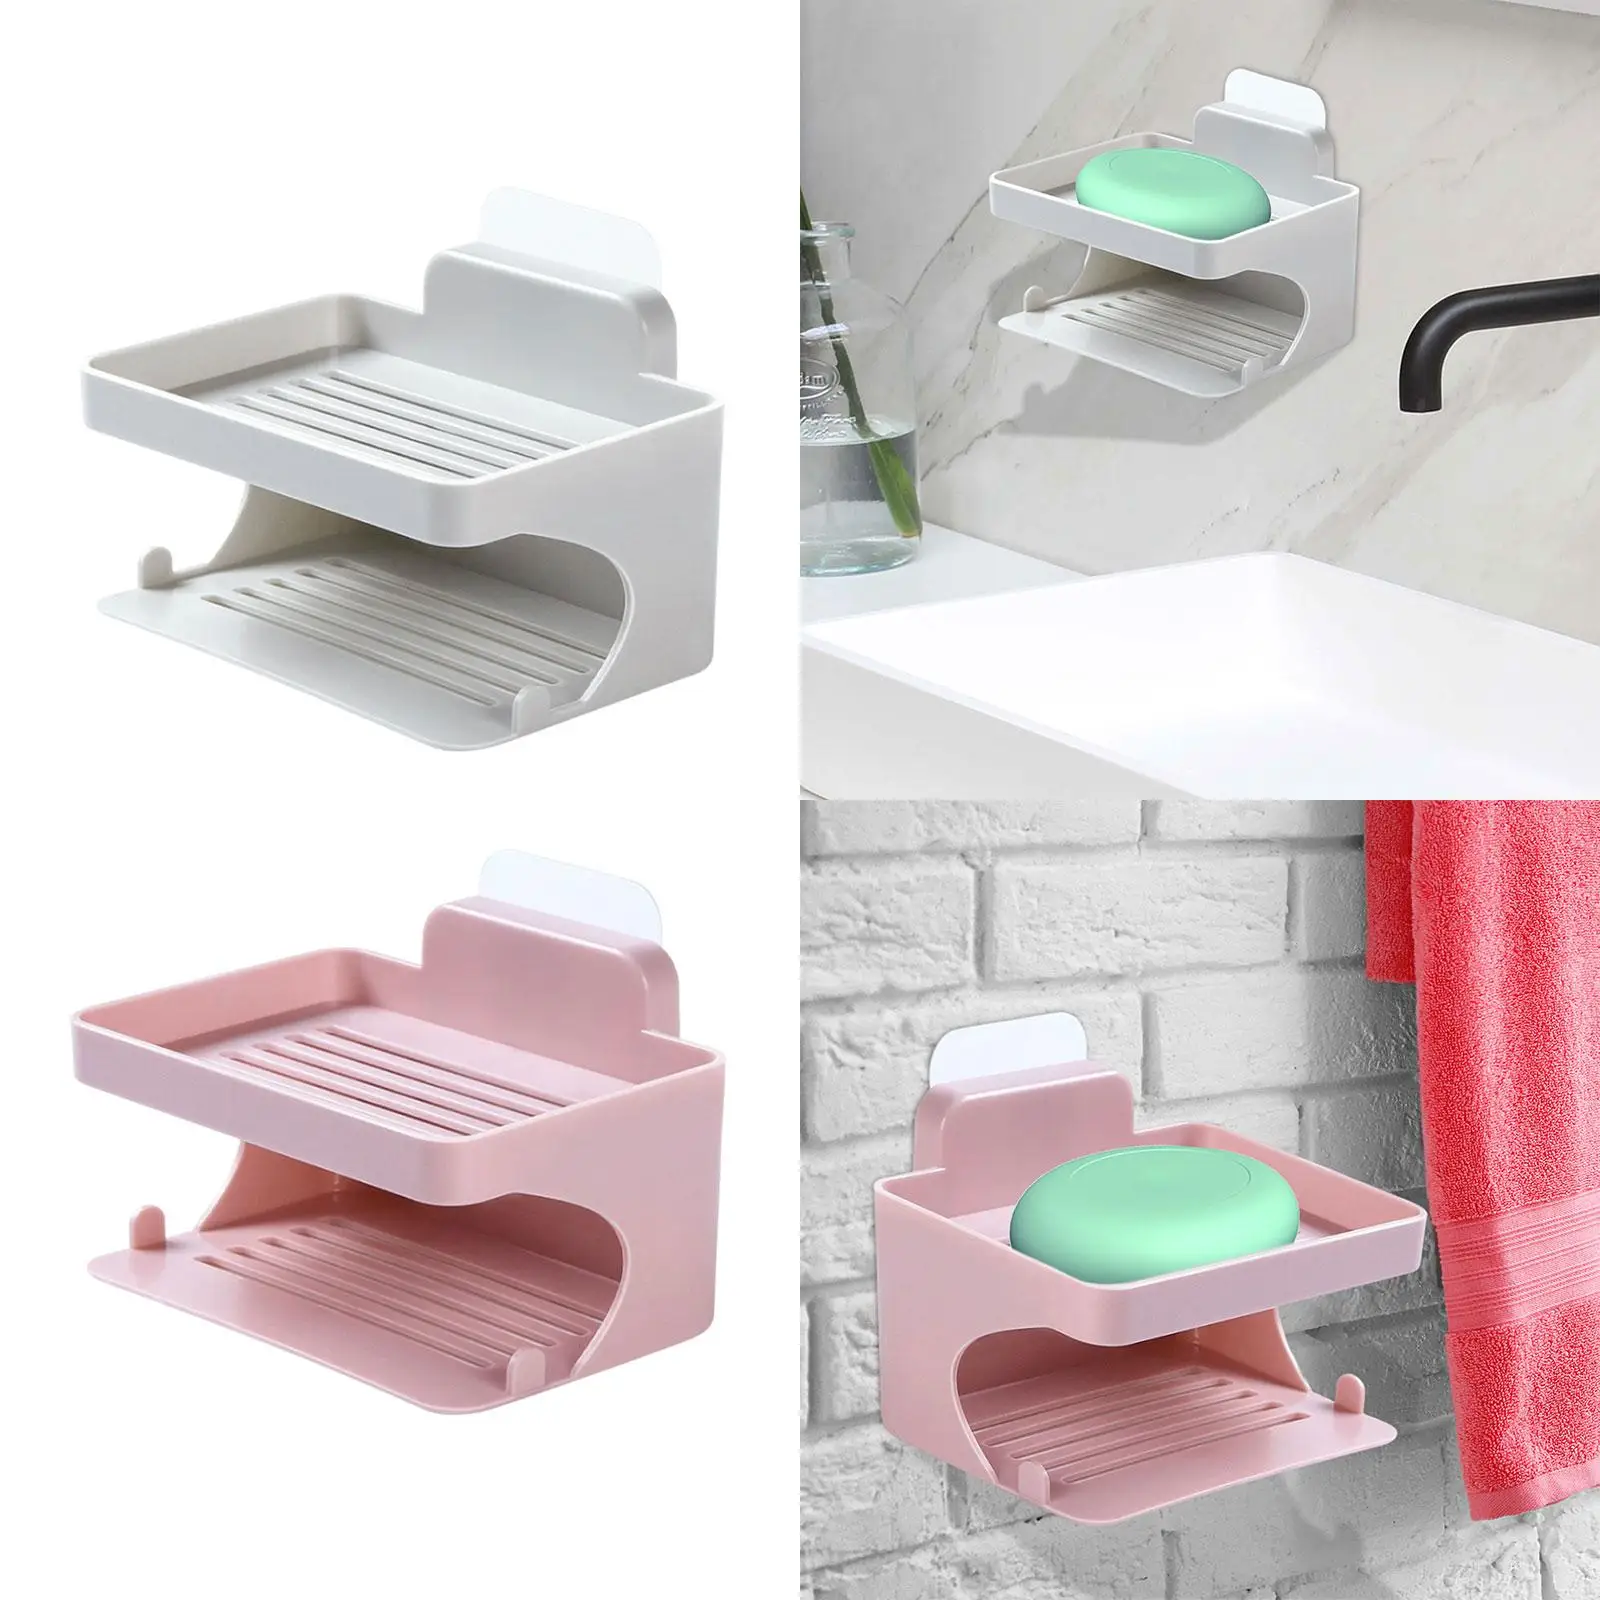 2 Tiers Soap Dish Holder Soap Tray Self Draining Wall Mounted Soap Rack for Bathroom Shower Wall Washroom Toilet Hotel